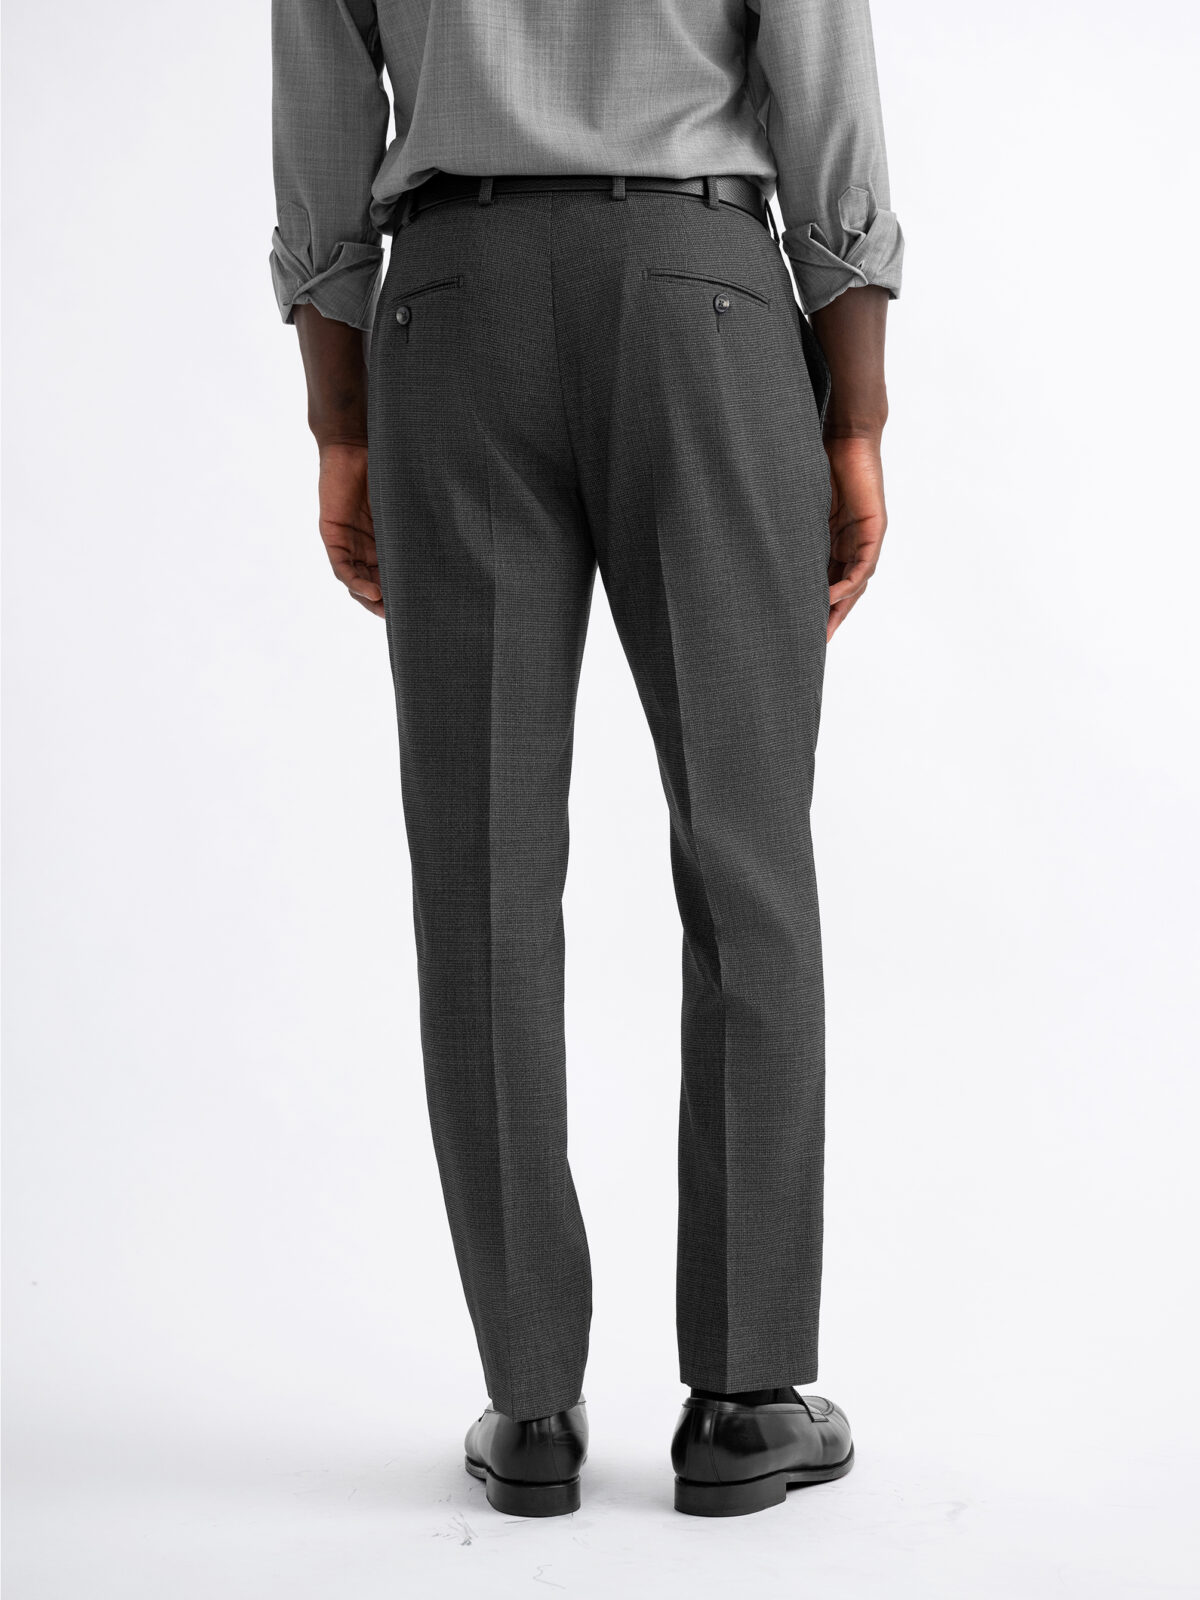 Grey Textured Stretch Wool Dress Pant - Custom Fit Tailored Clothing